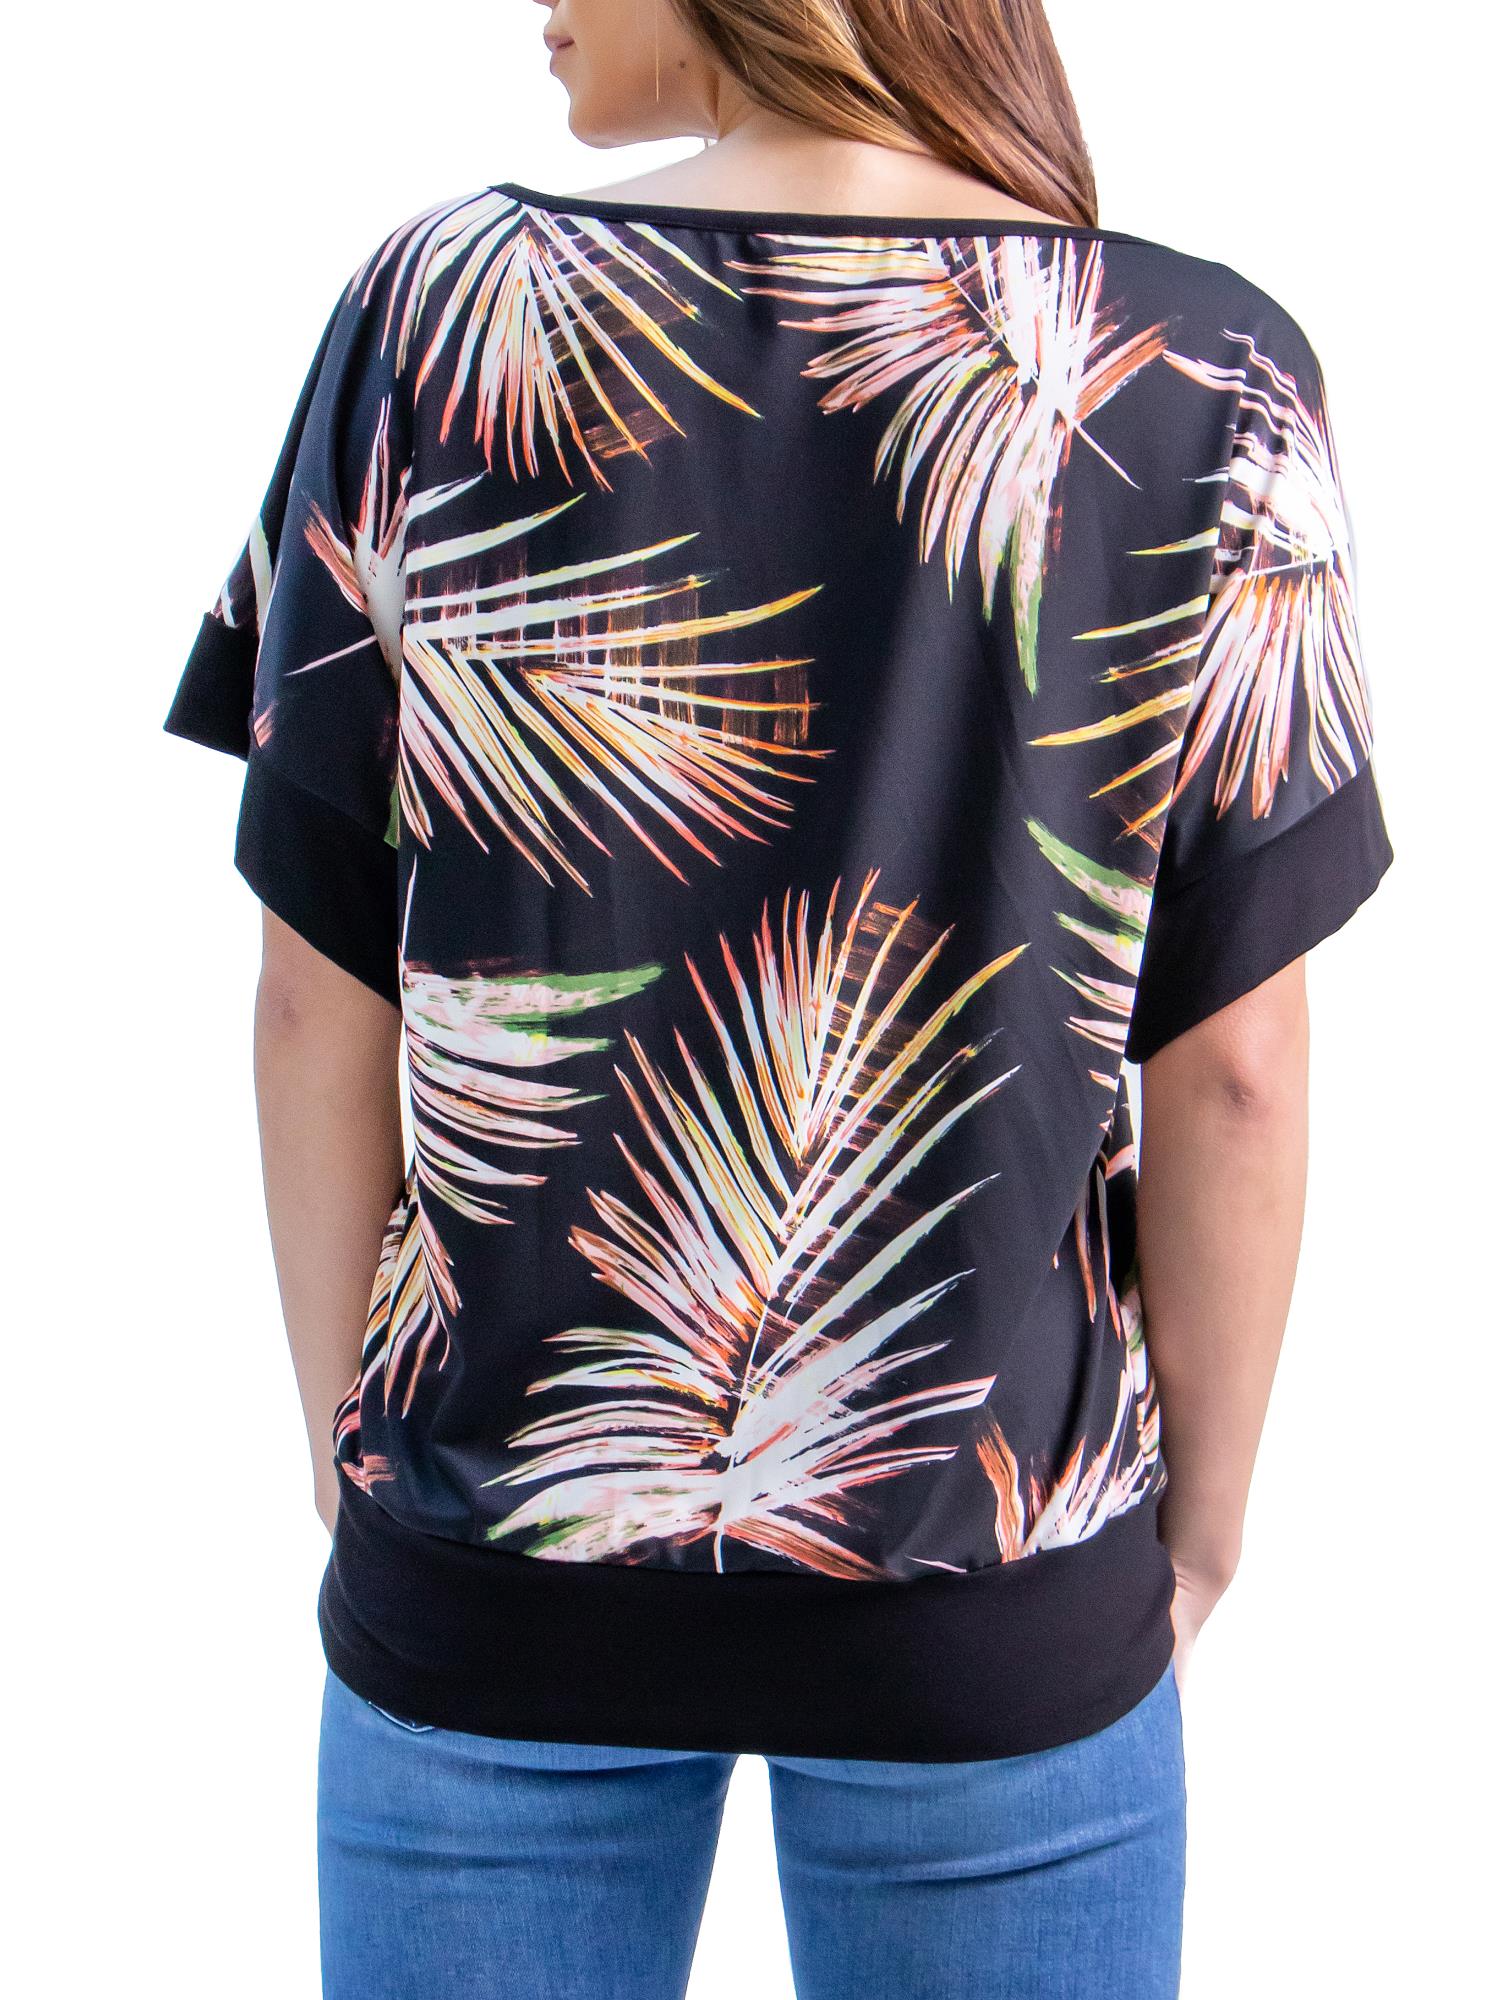 24/7 Comfort Apparel Womens Palm Leaf Print Wide Sleeve Top - image 2 of 3